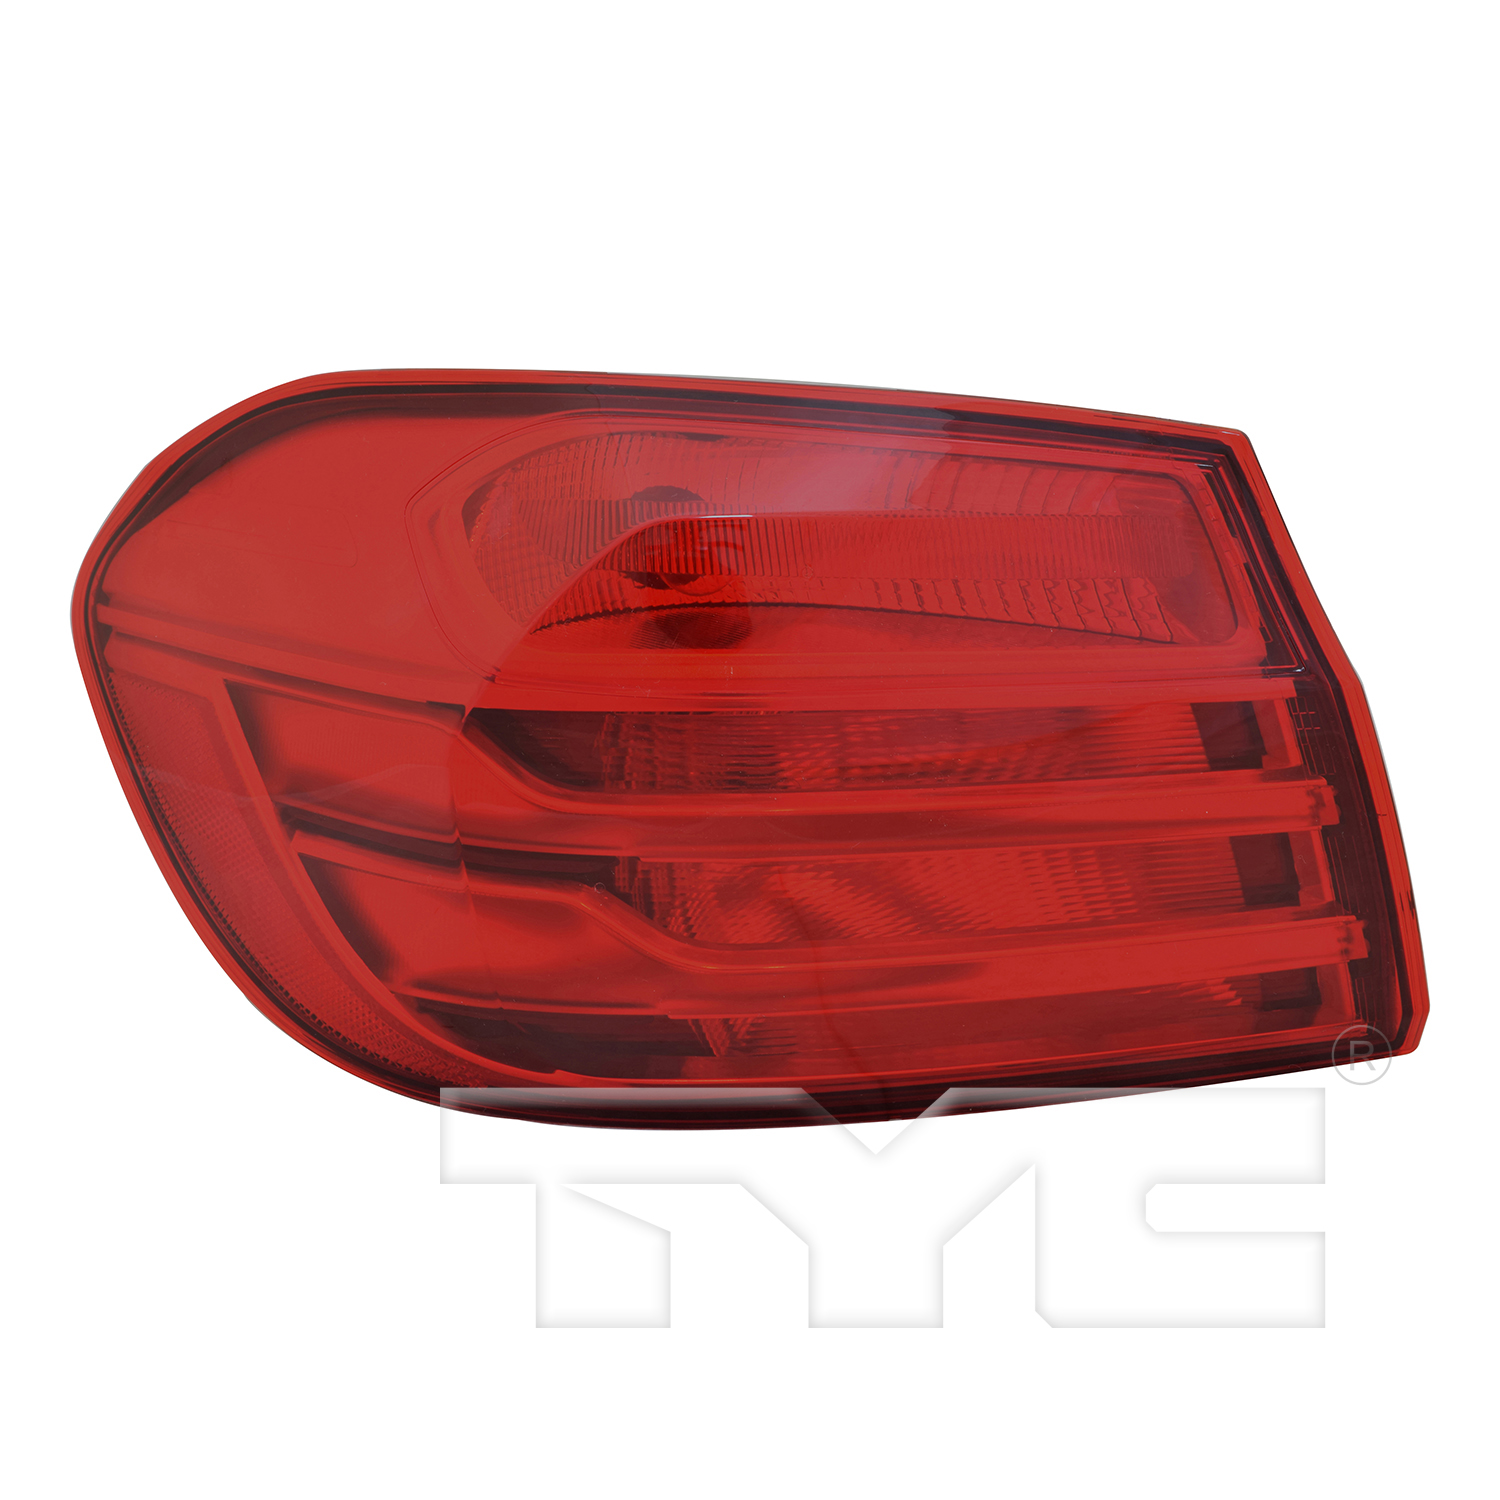 Aftermarket TAILLIGHTS for BMW - 440I GRAN COUPE, 440i Gran Coupe,17-17,LT Taillamp assy outer